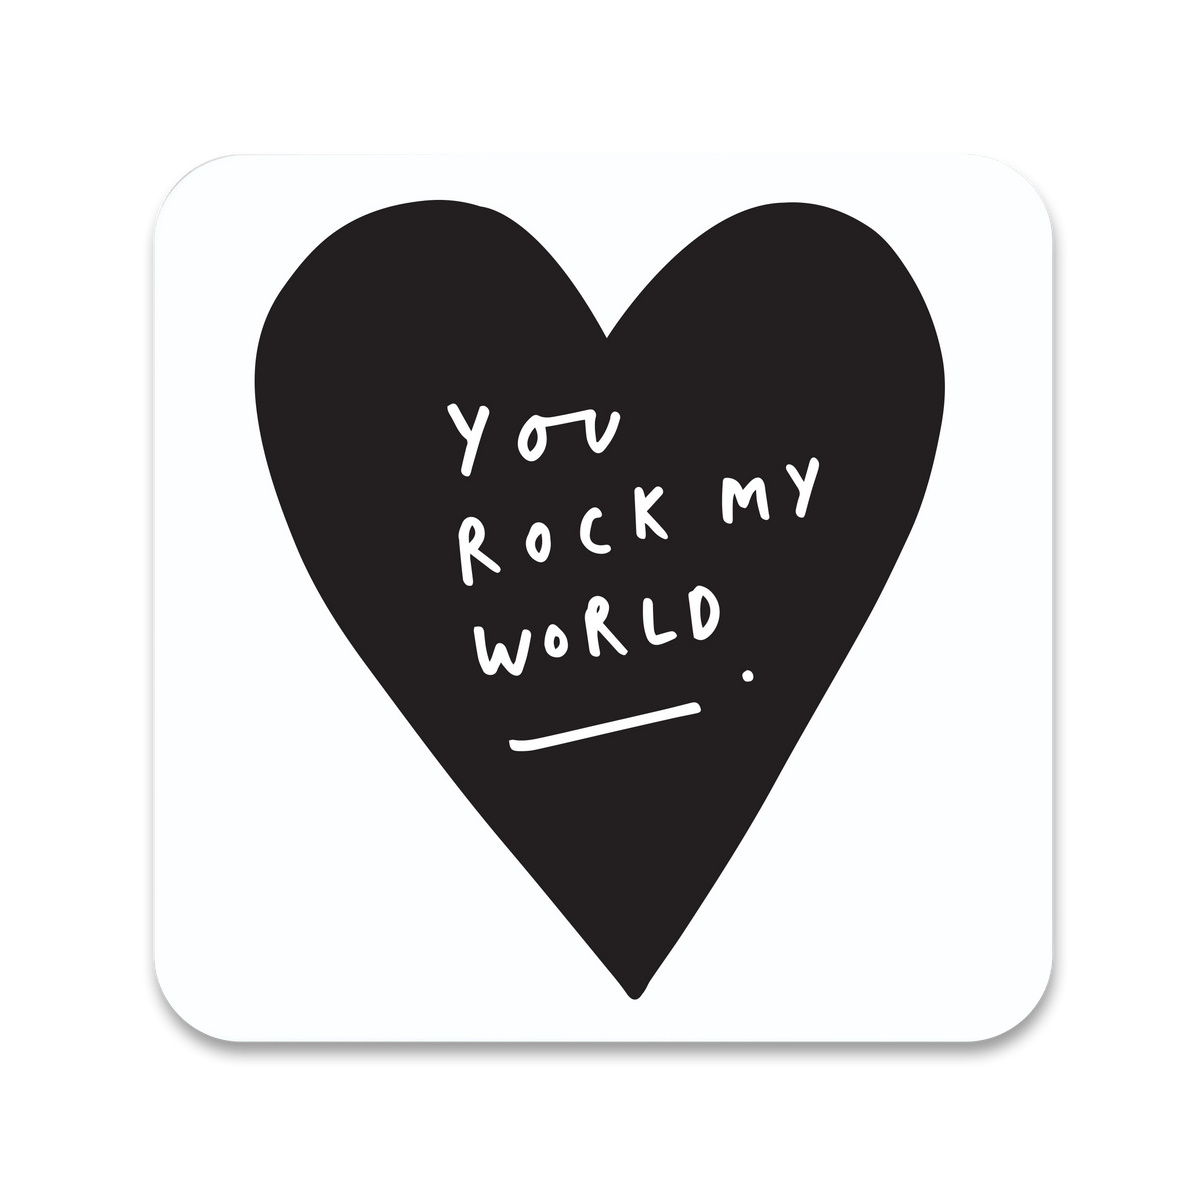 Old　English　World　Hand　Lettered　—　Company　Typography　Coaster　My　Rock　You　Coaster